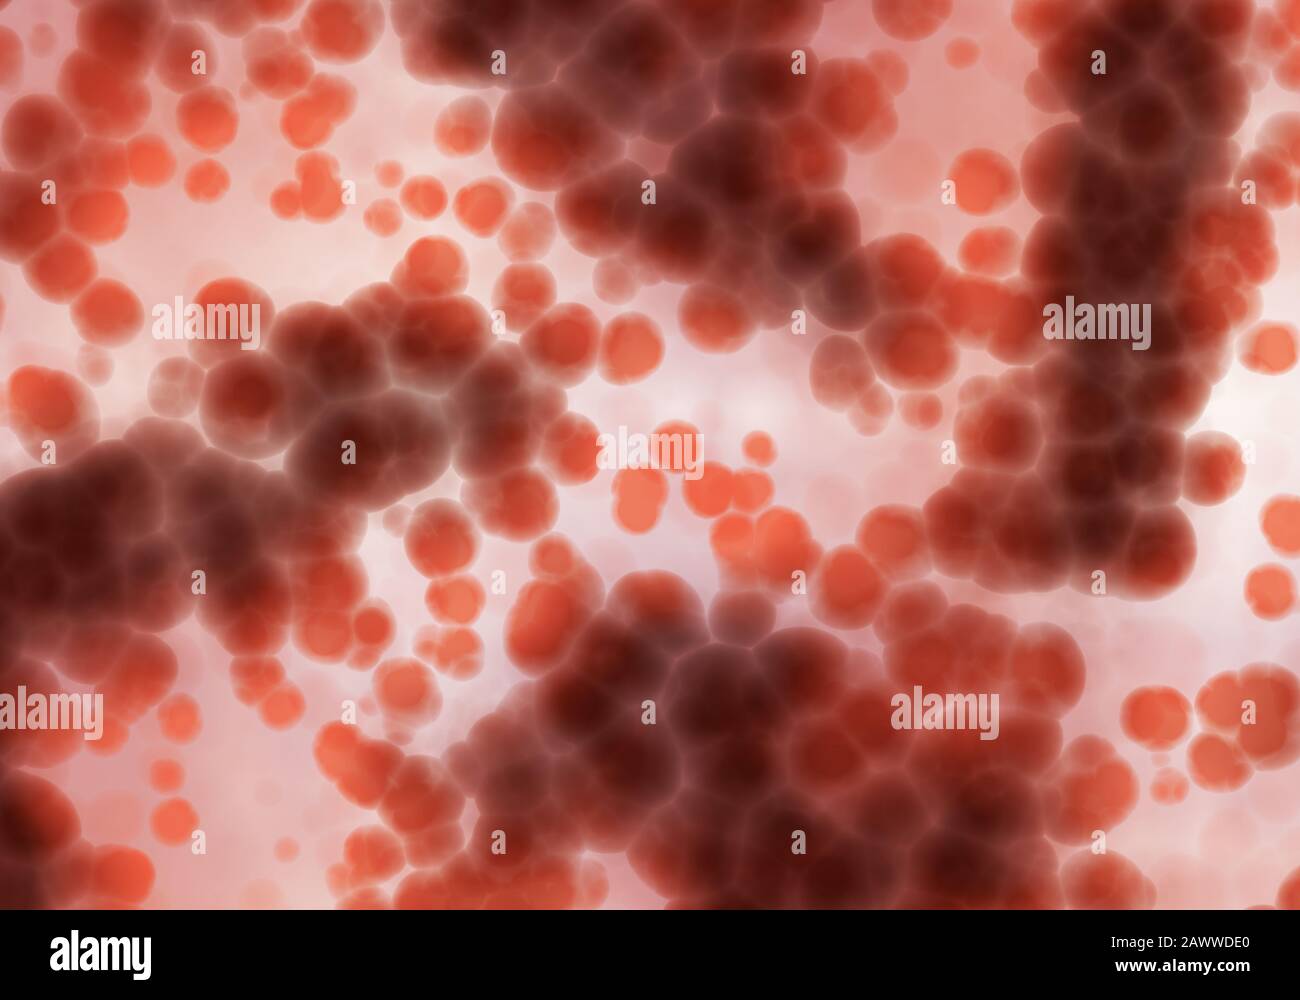 Detailed Medical Cell Background - 3D illustration Stock Photo